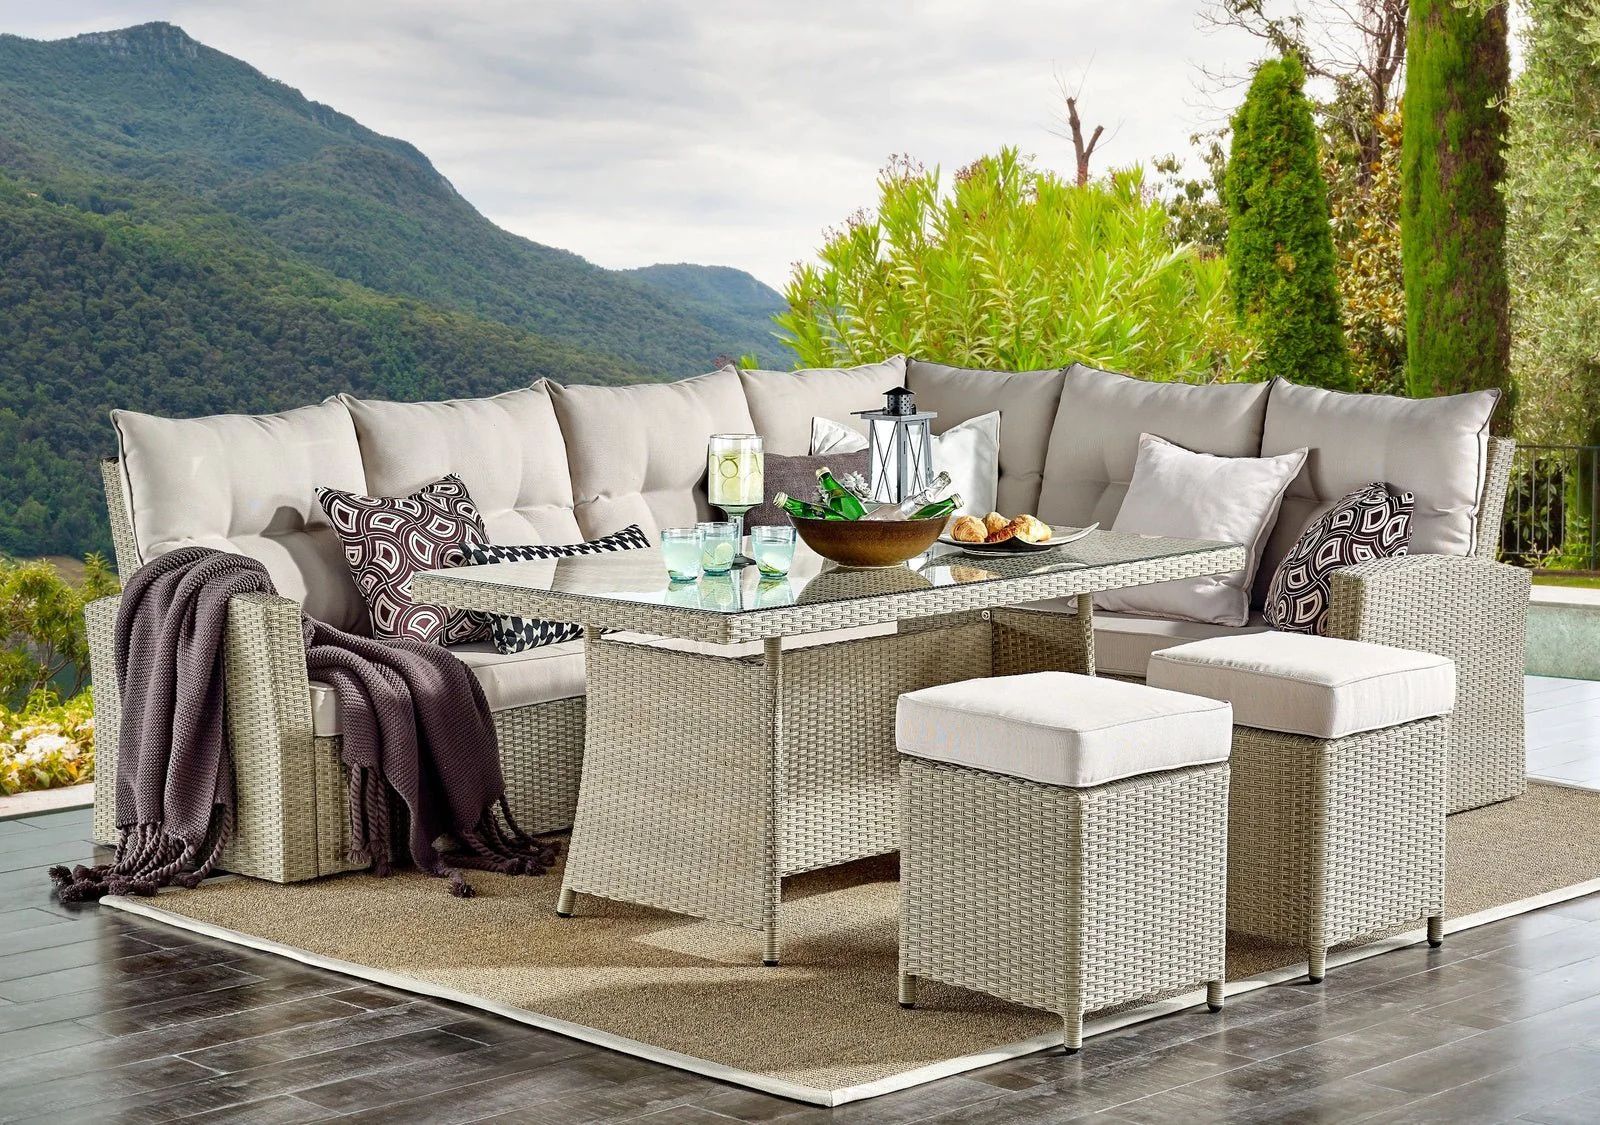 Cream Canaan All-weather Wicker Outdoor Deep-seat Dining Sectional Set | Pier 1